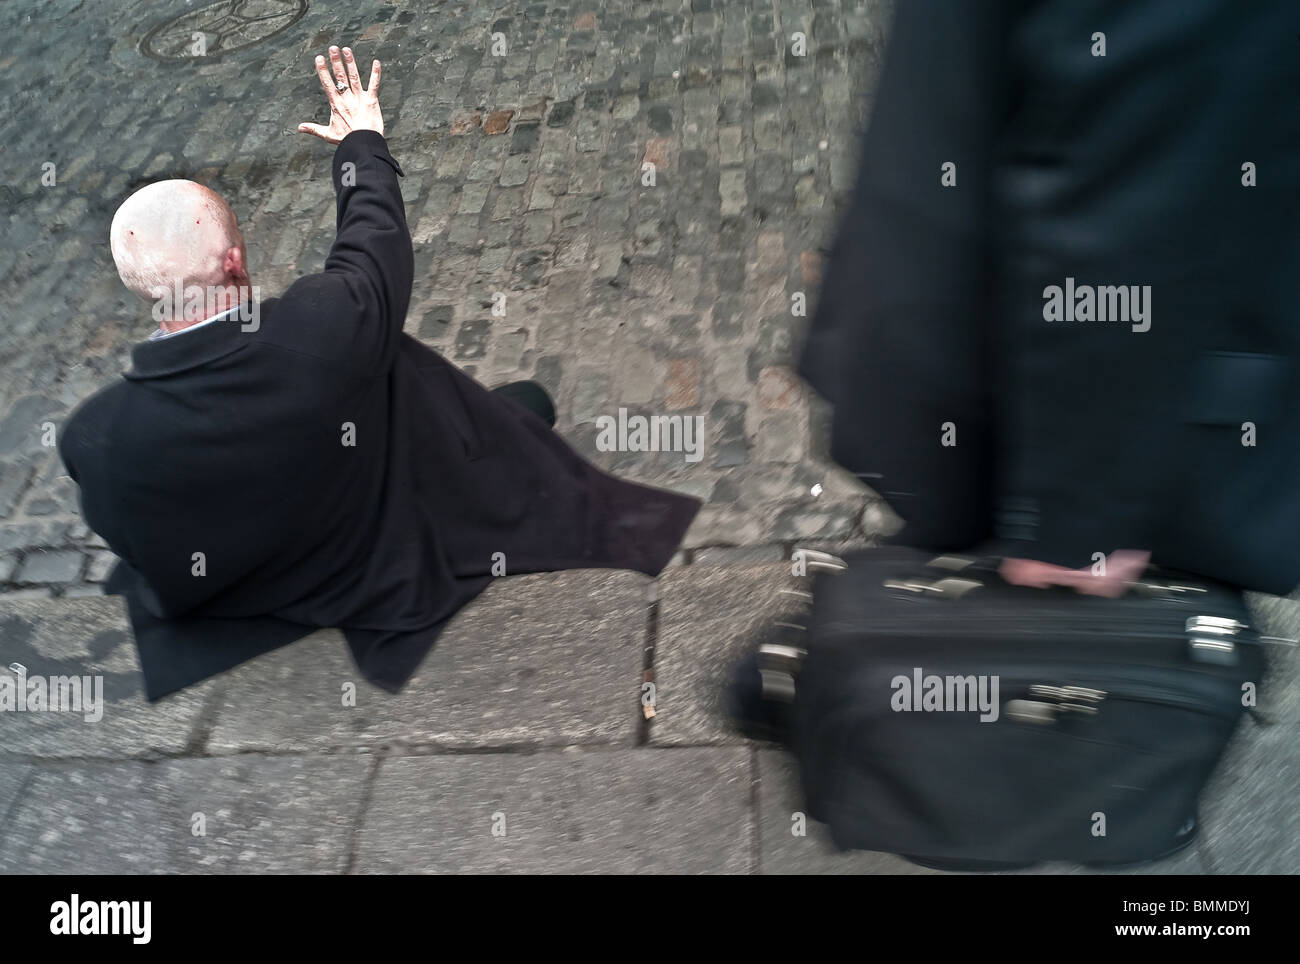 Drunk man sitting on the side of the road in Templebar Dublin Ireland Stock Photo